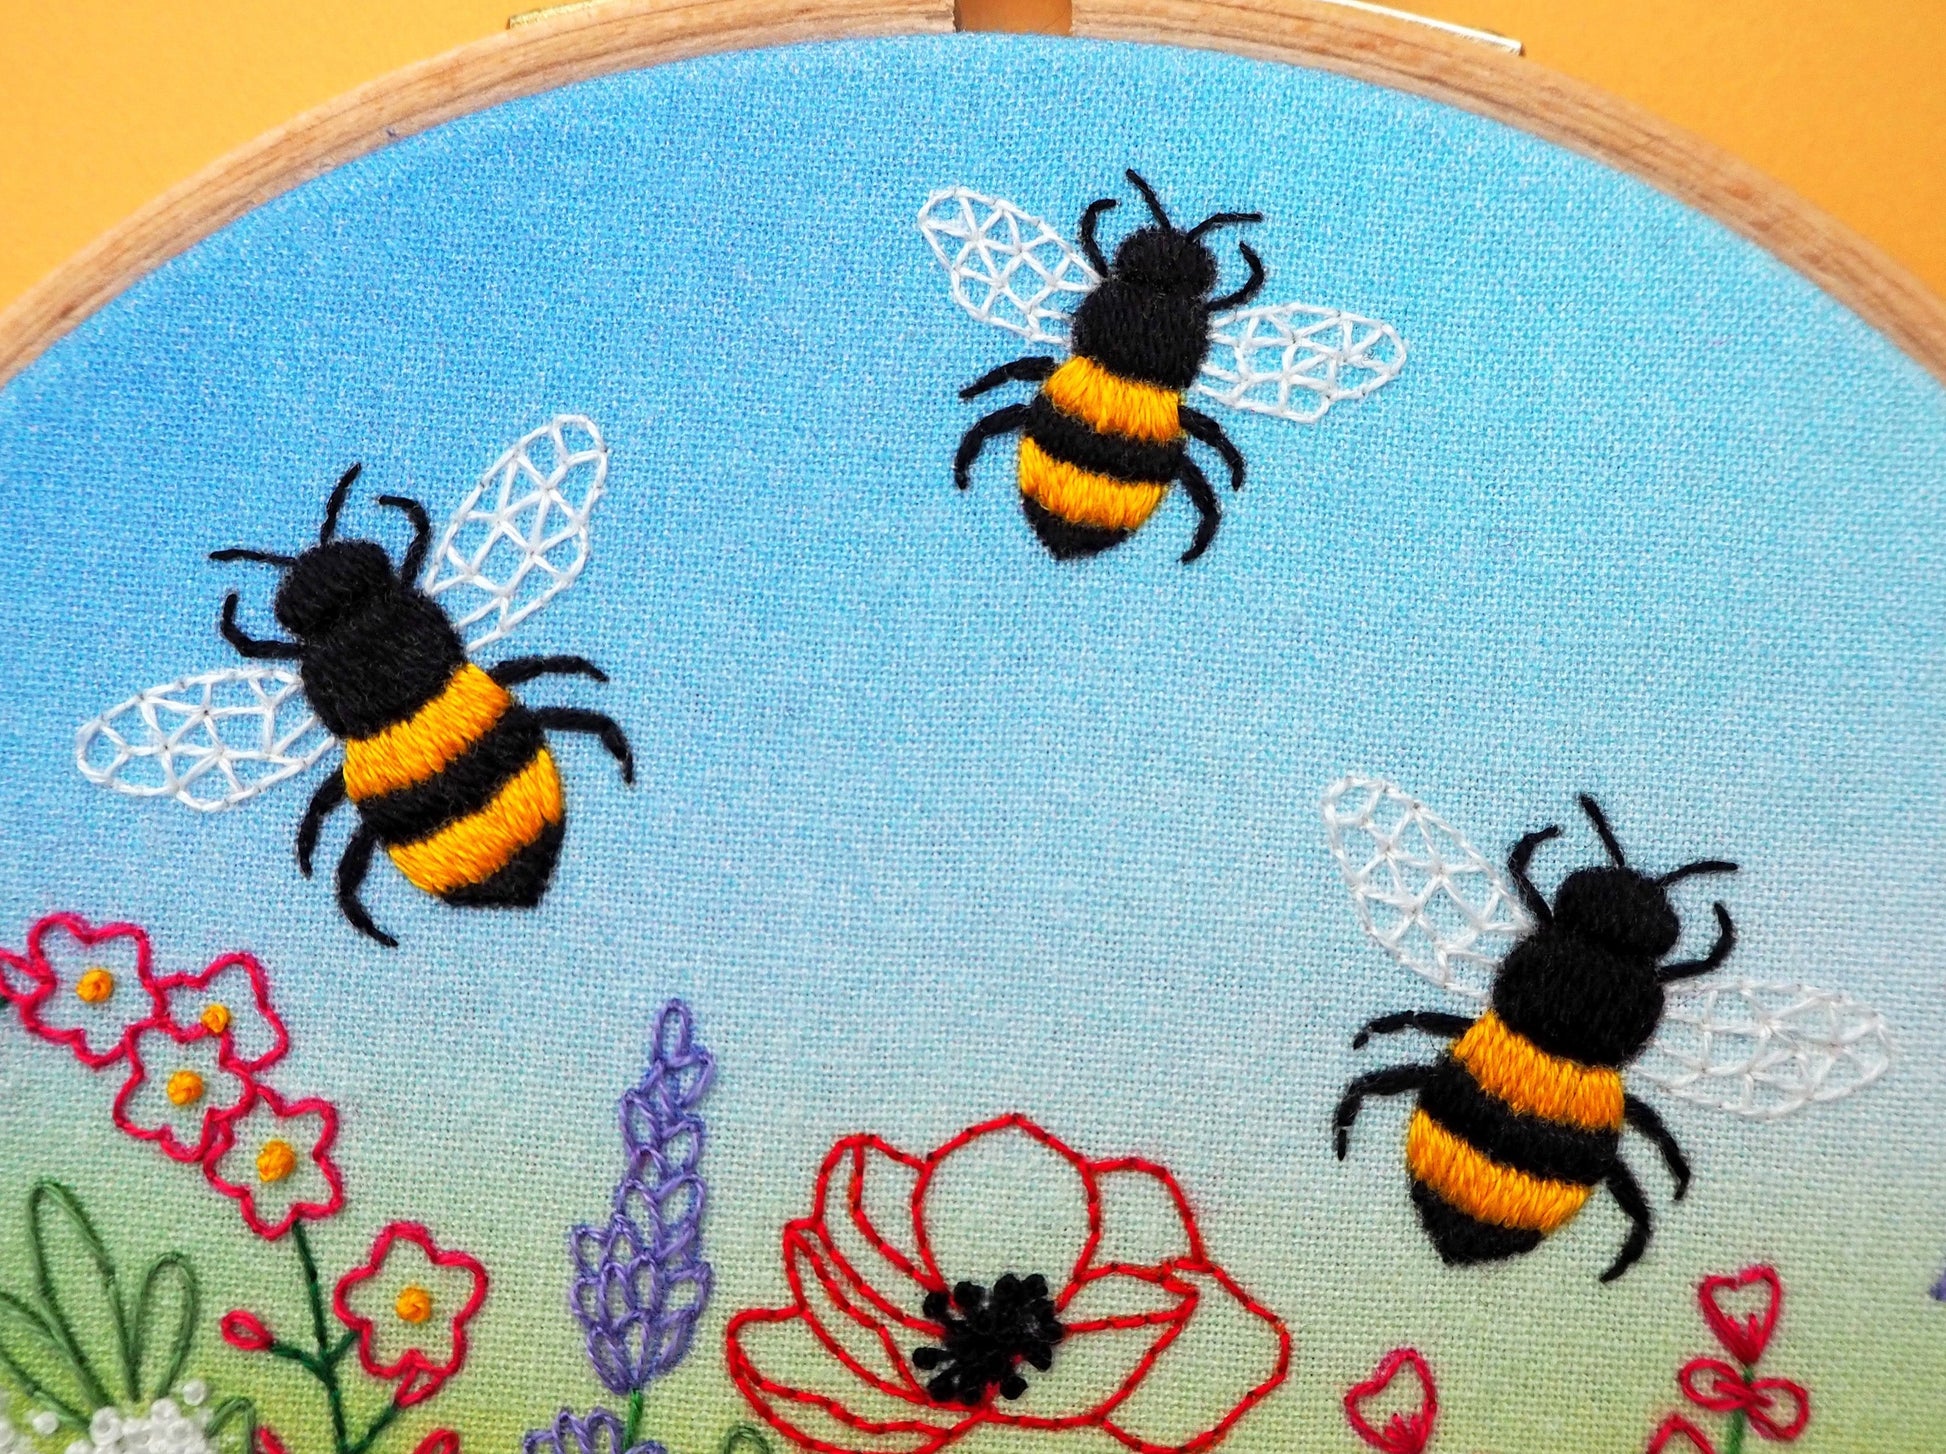 Bees Stamped Embroidery Patterns UK, Beginners Embroidery Patterns